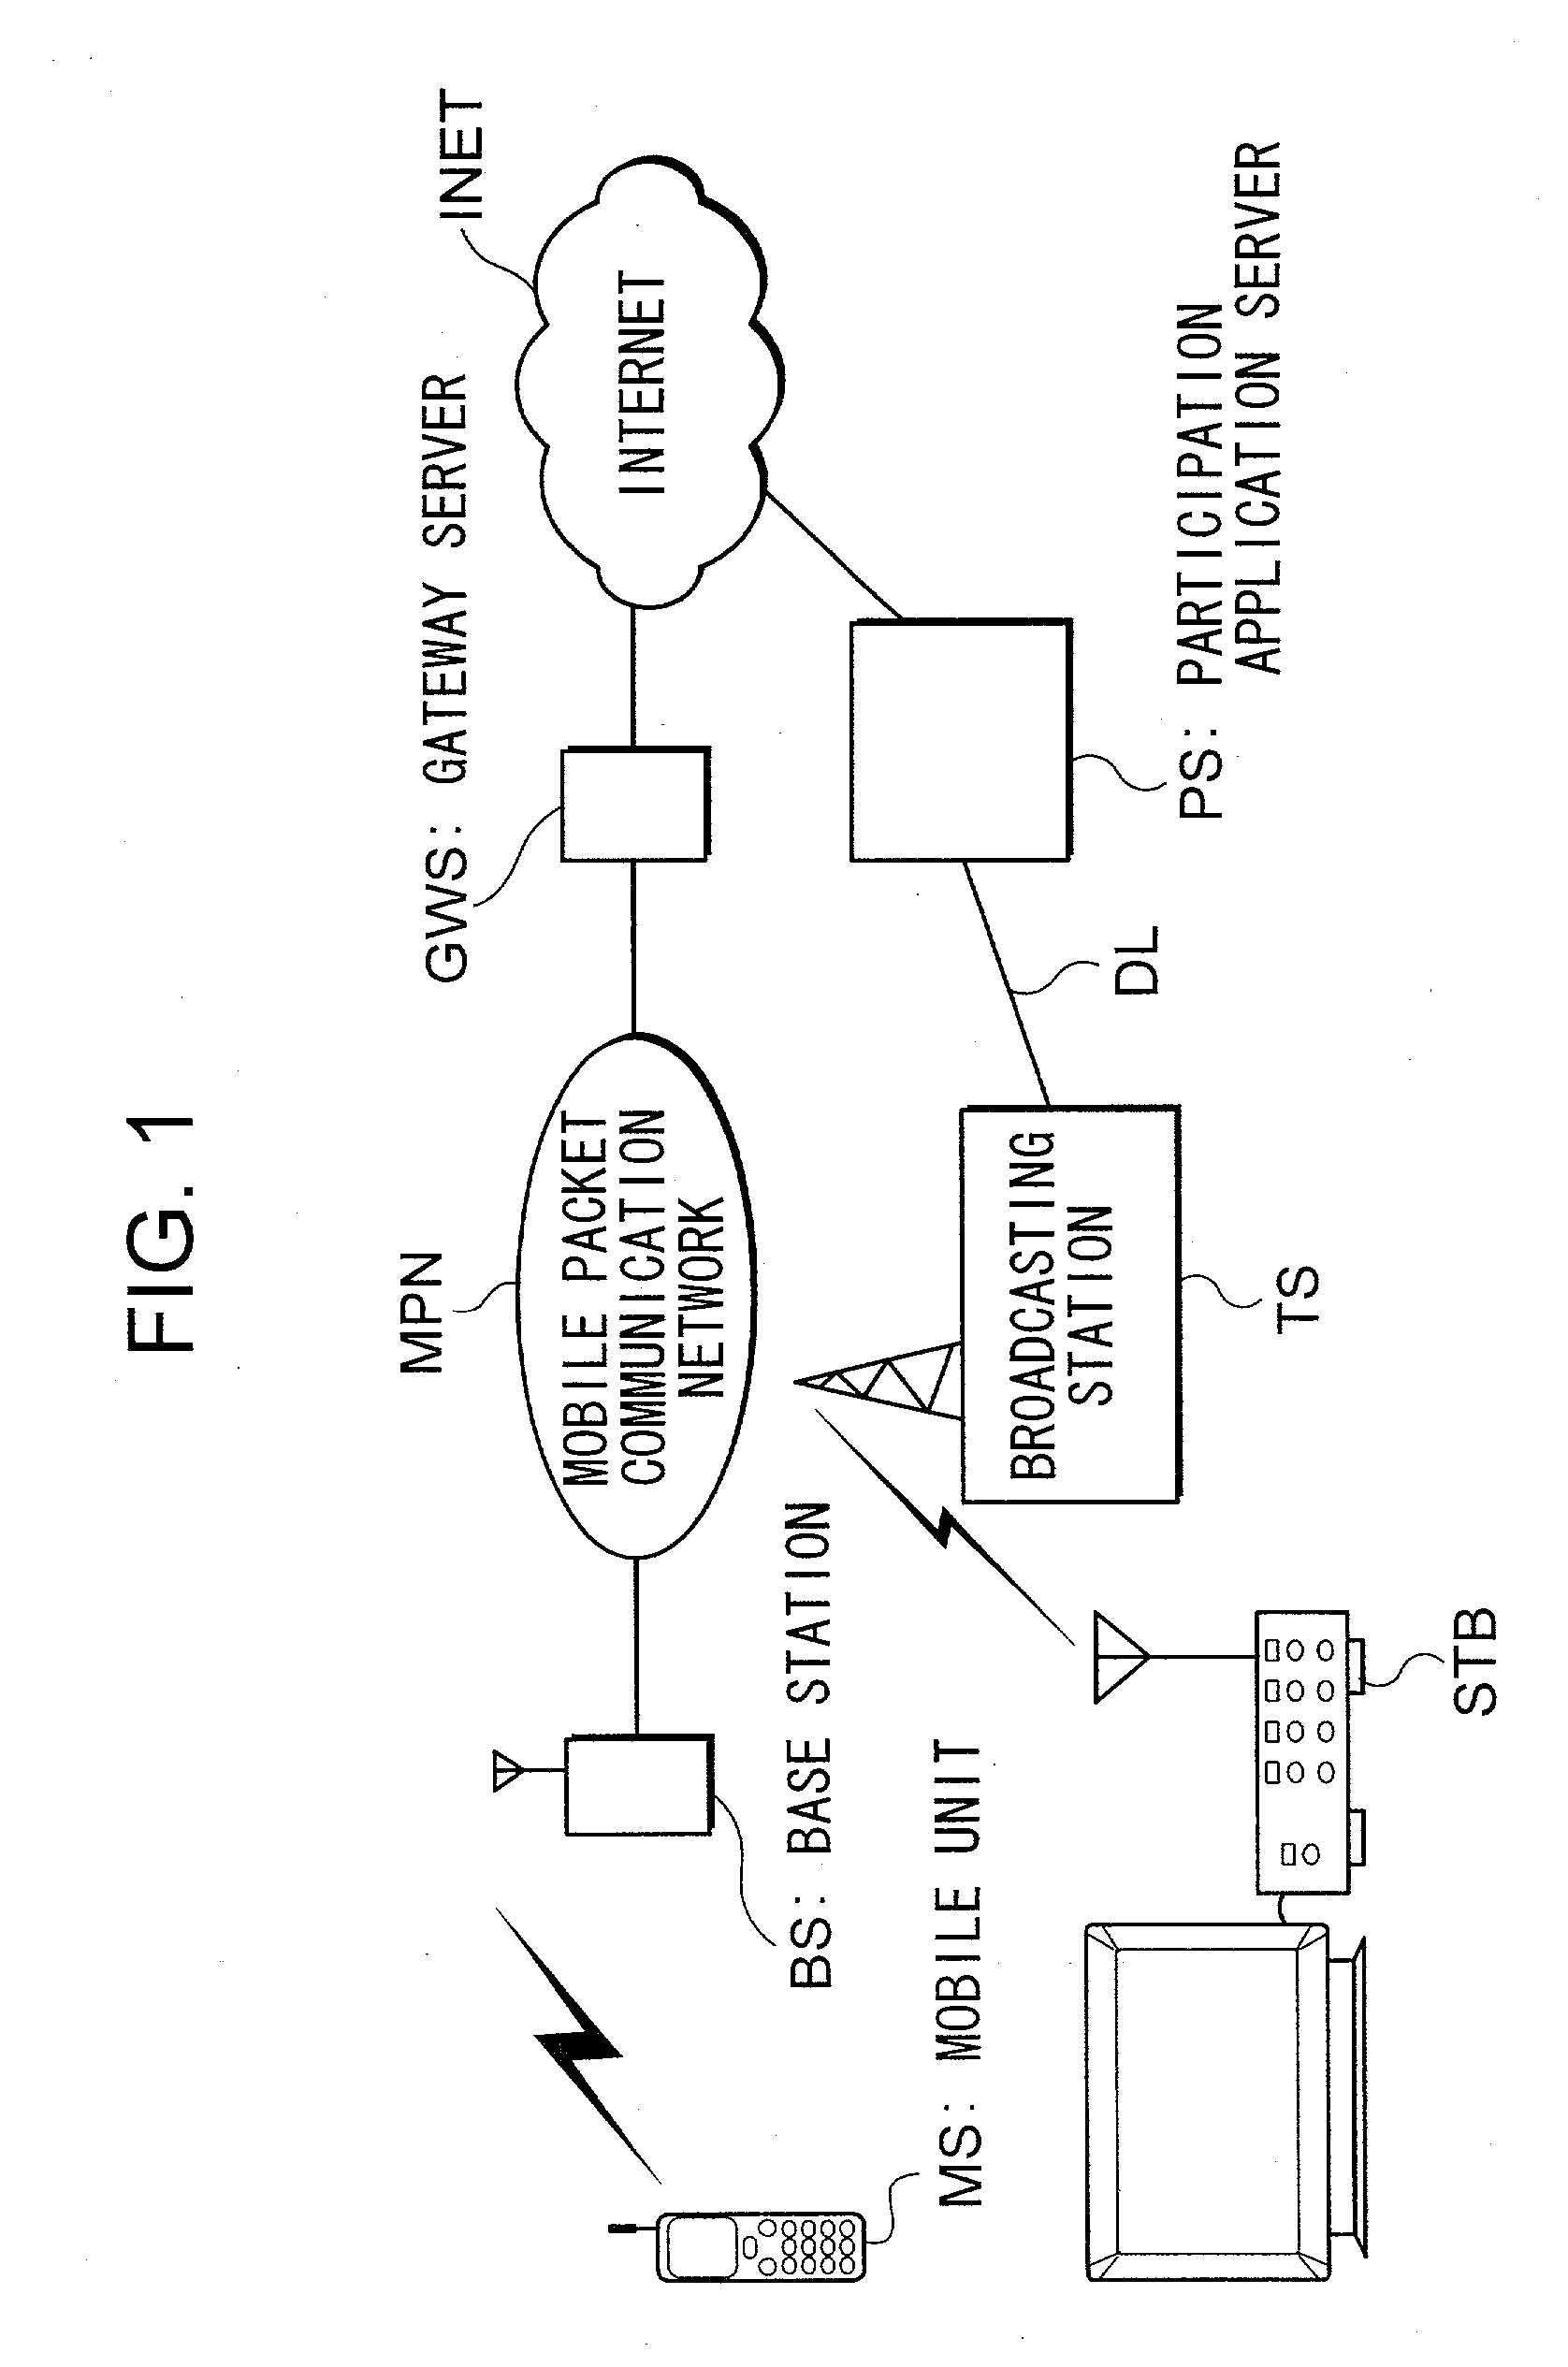 Program participants selection method through narrowing and accompanying server